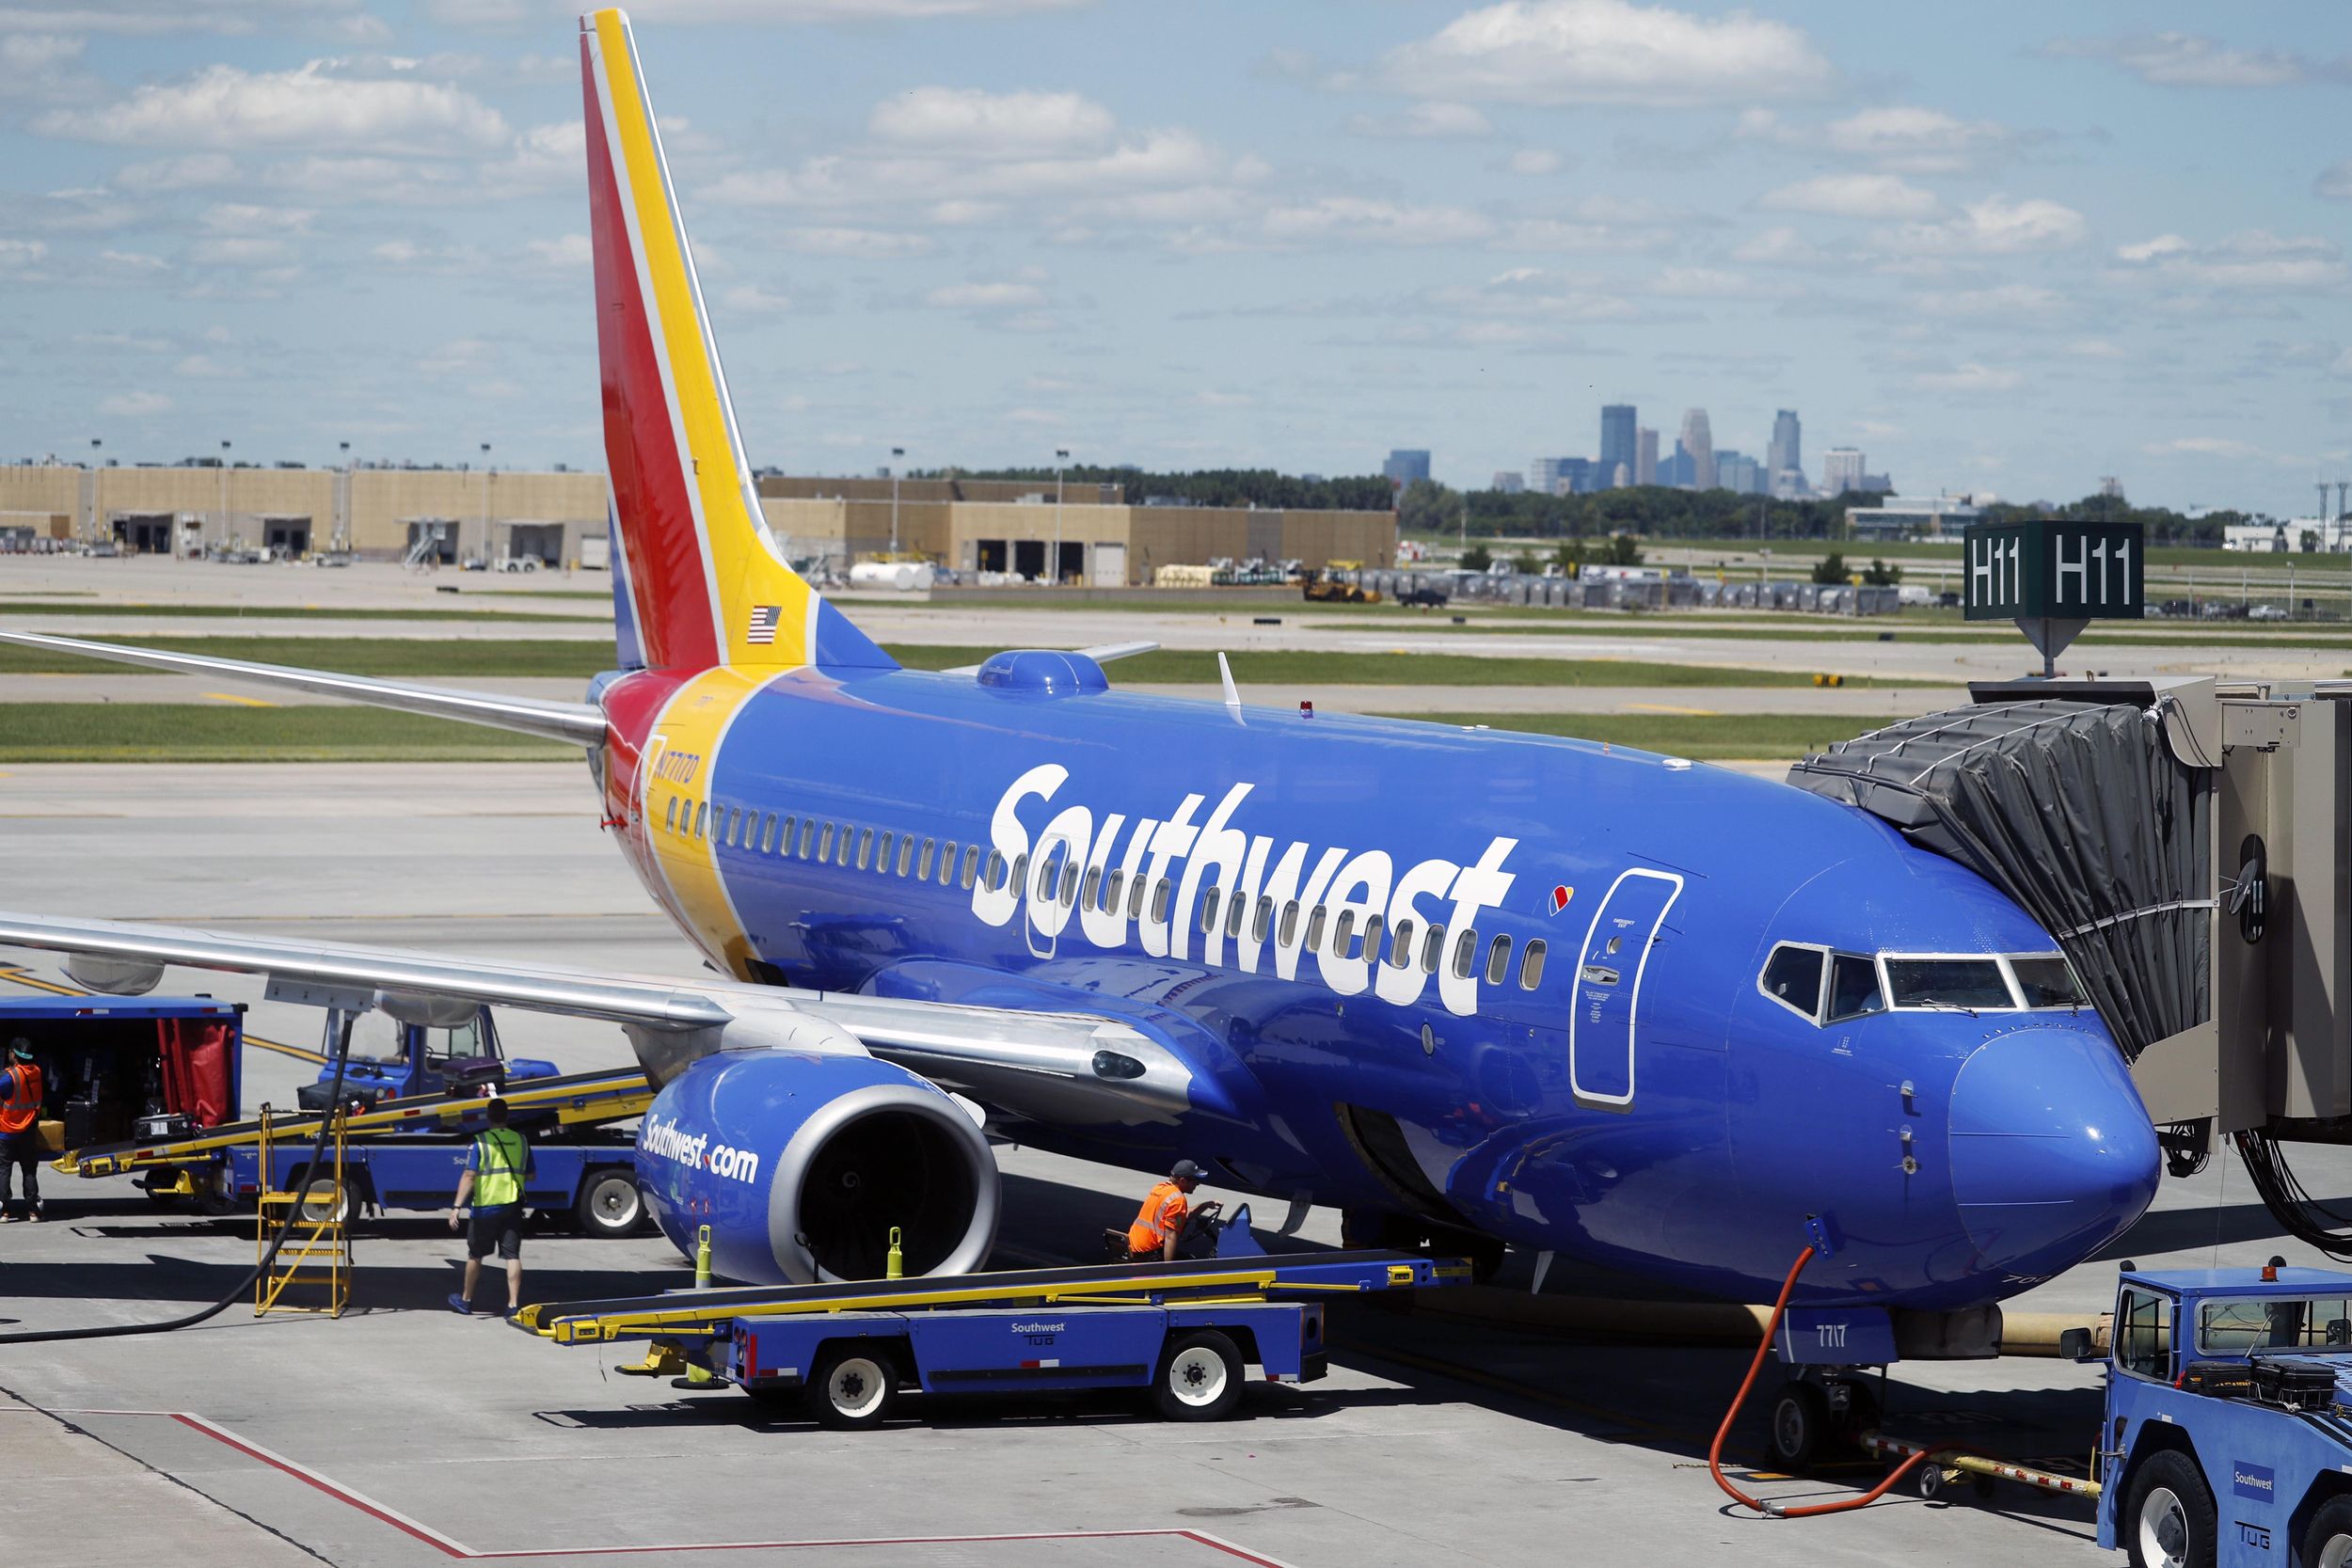 New Southwest Airlines emotional support animal policy allows only dogs